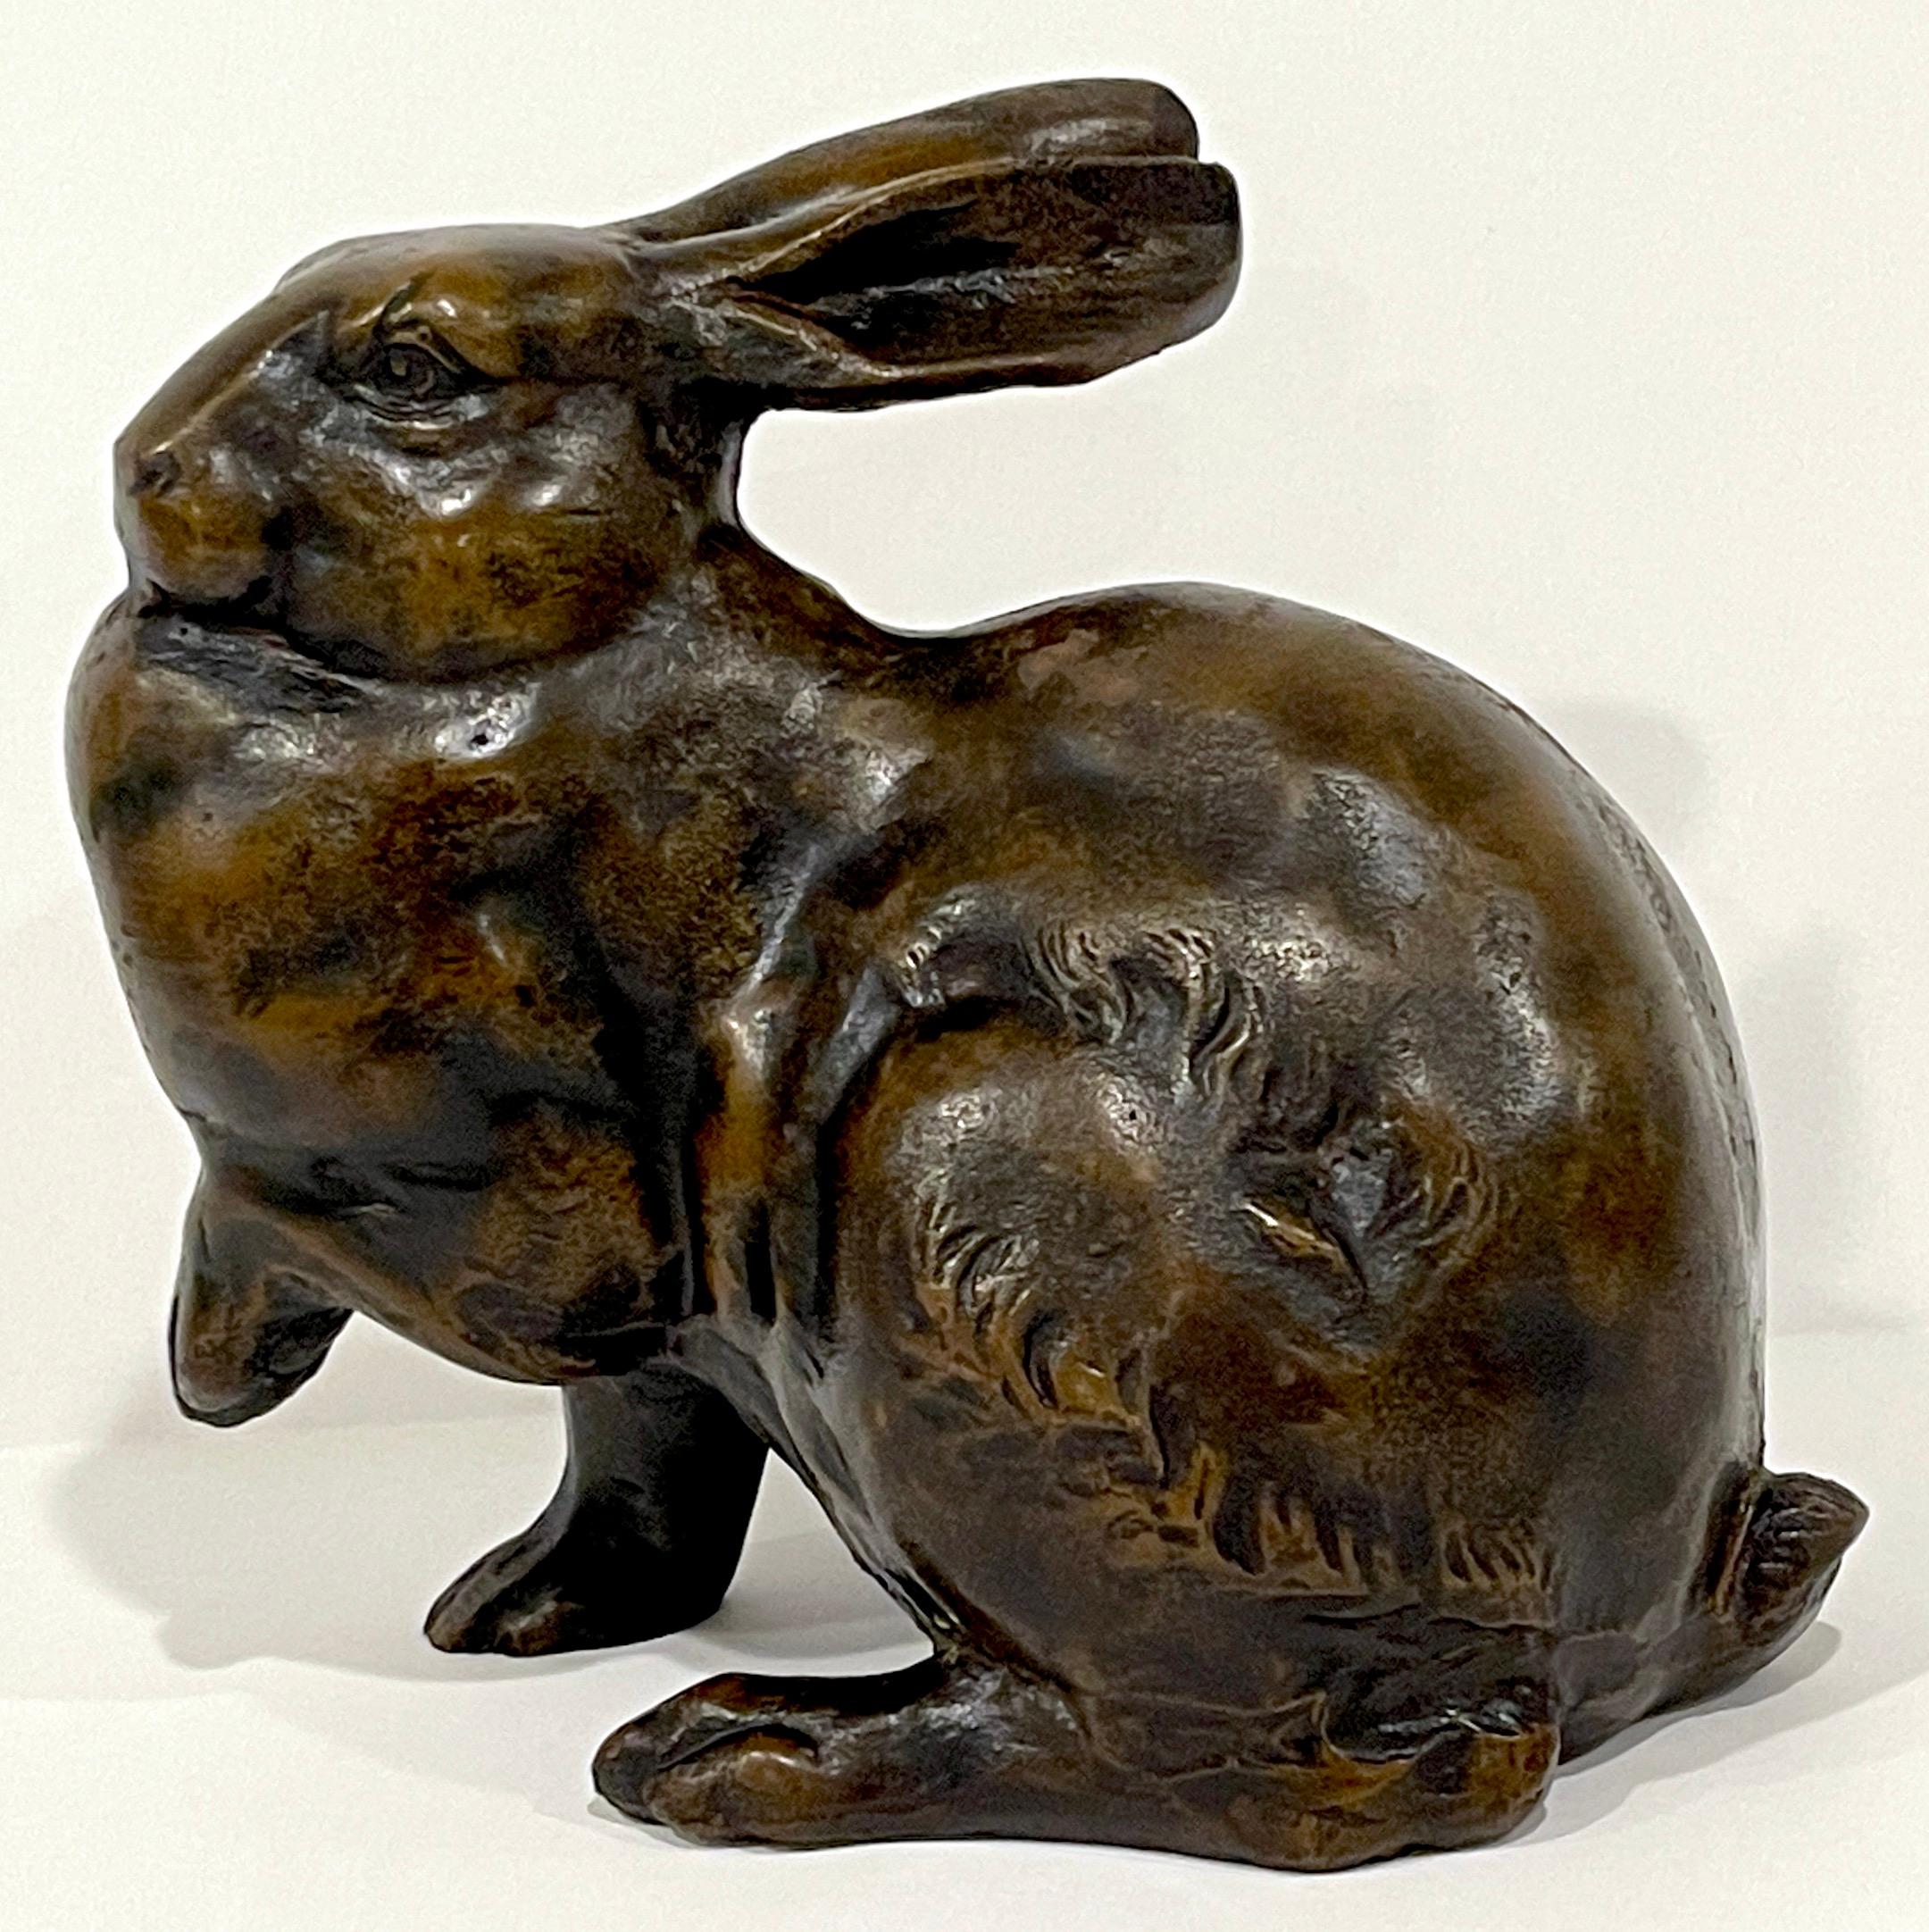 Japanese Bronze Meiji Period Bronze Sculpture of a Usagi (Rabbit) 
Japan, Circa 1900

Immerse yourself to the elegance of Meiji-era Japan with this stunning bronze sculpture depicting a poised usagi/ rabbit, a true embodiment of grace and